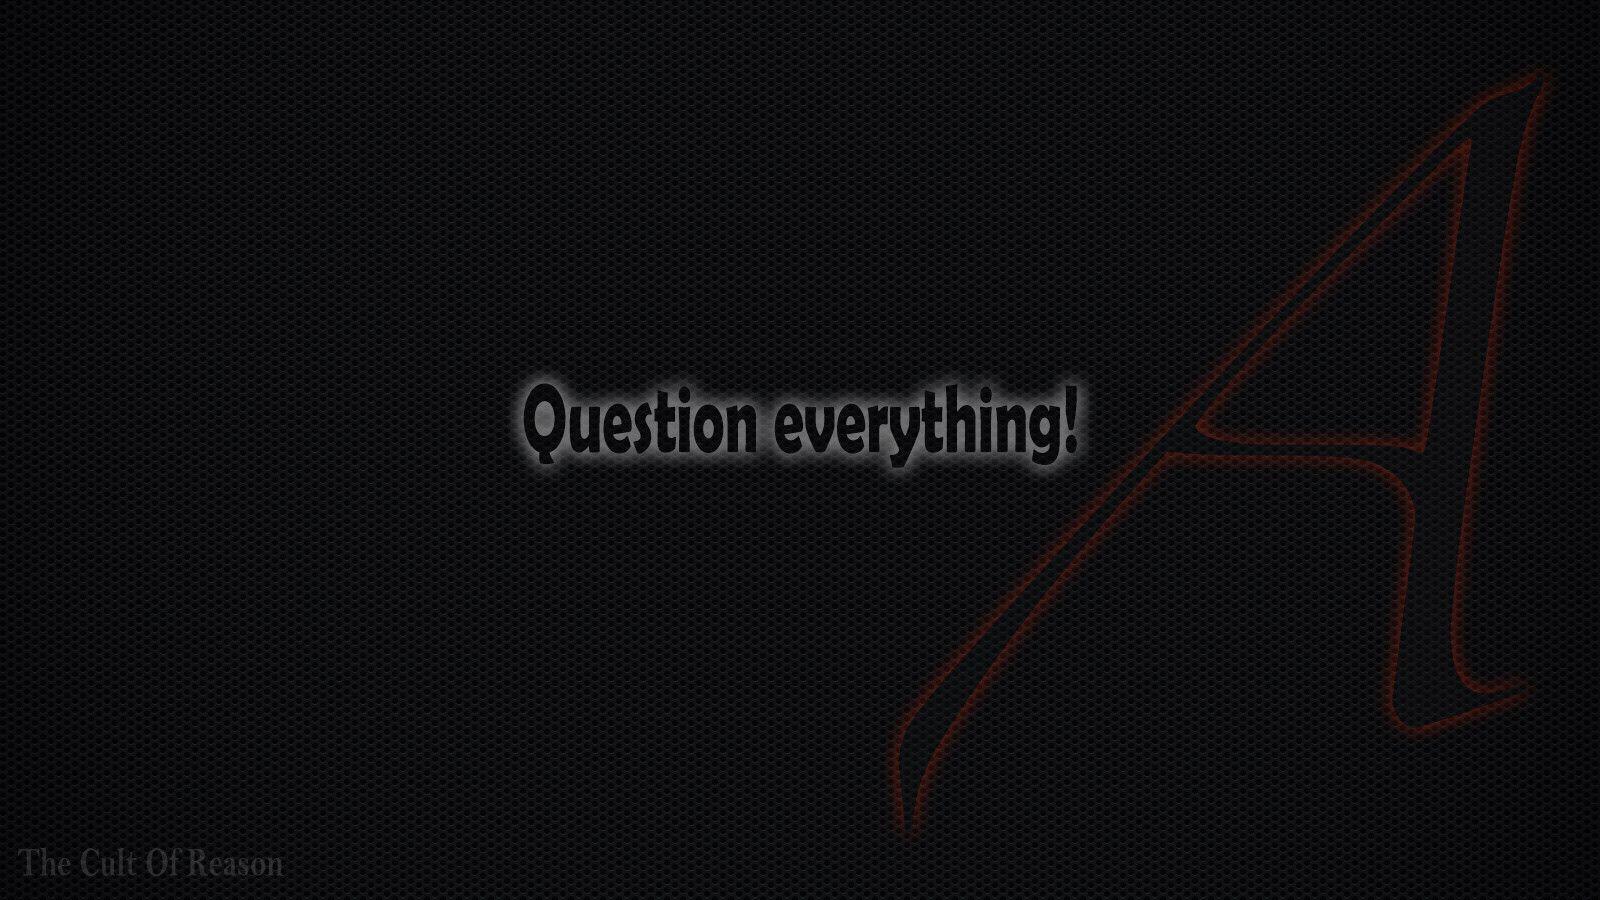 Free Atheism wallpaper: Question Everything!. The Cult Of Reason